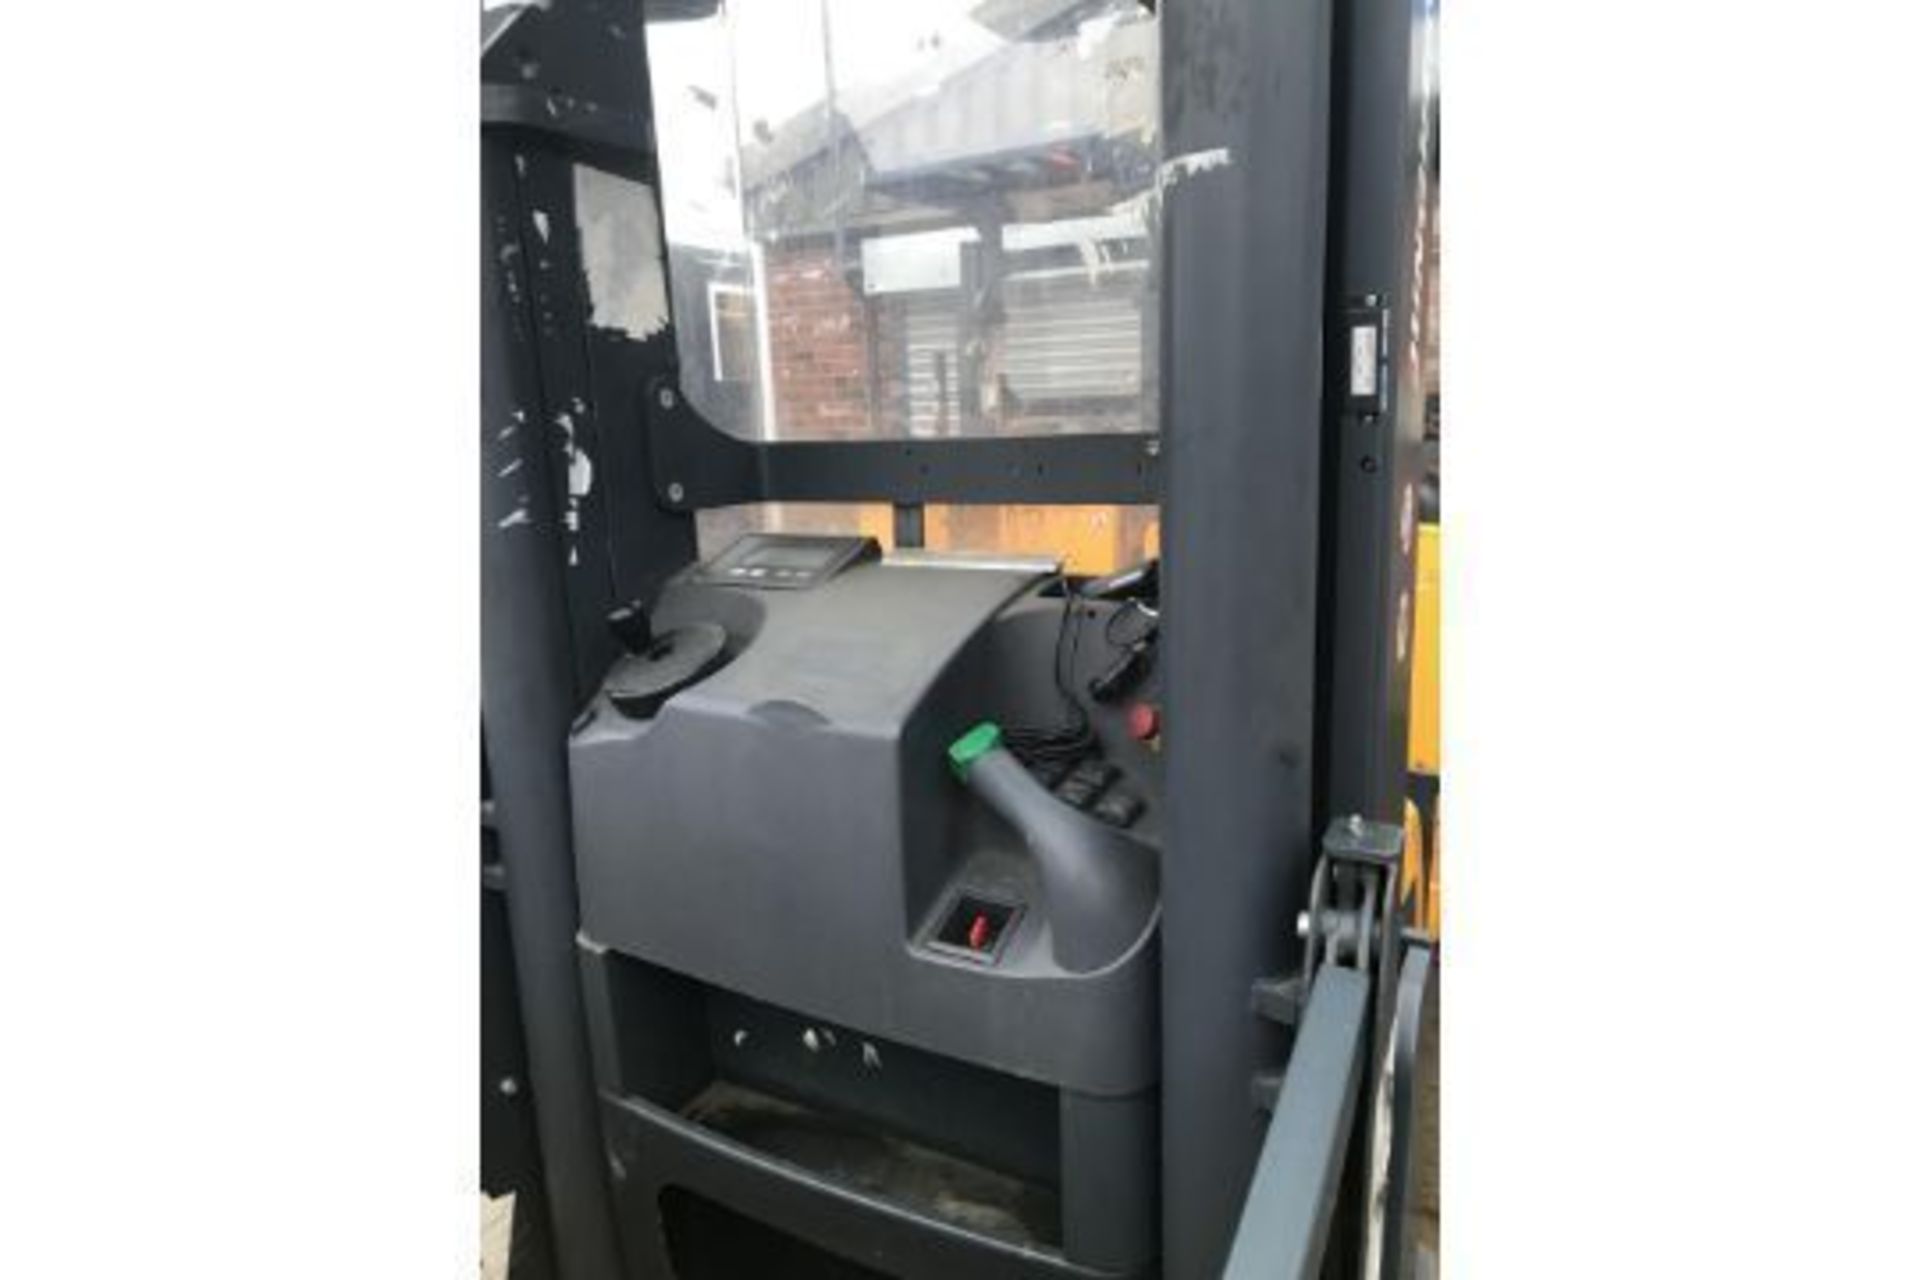 2006 BATTERY OPERATED JUNGHEINRICH FORKLIFT - Image 3 of 5